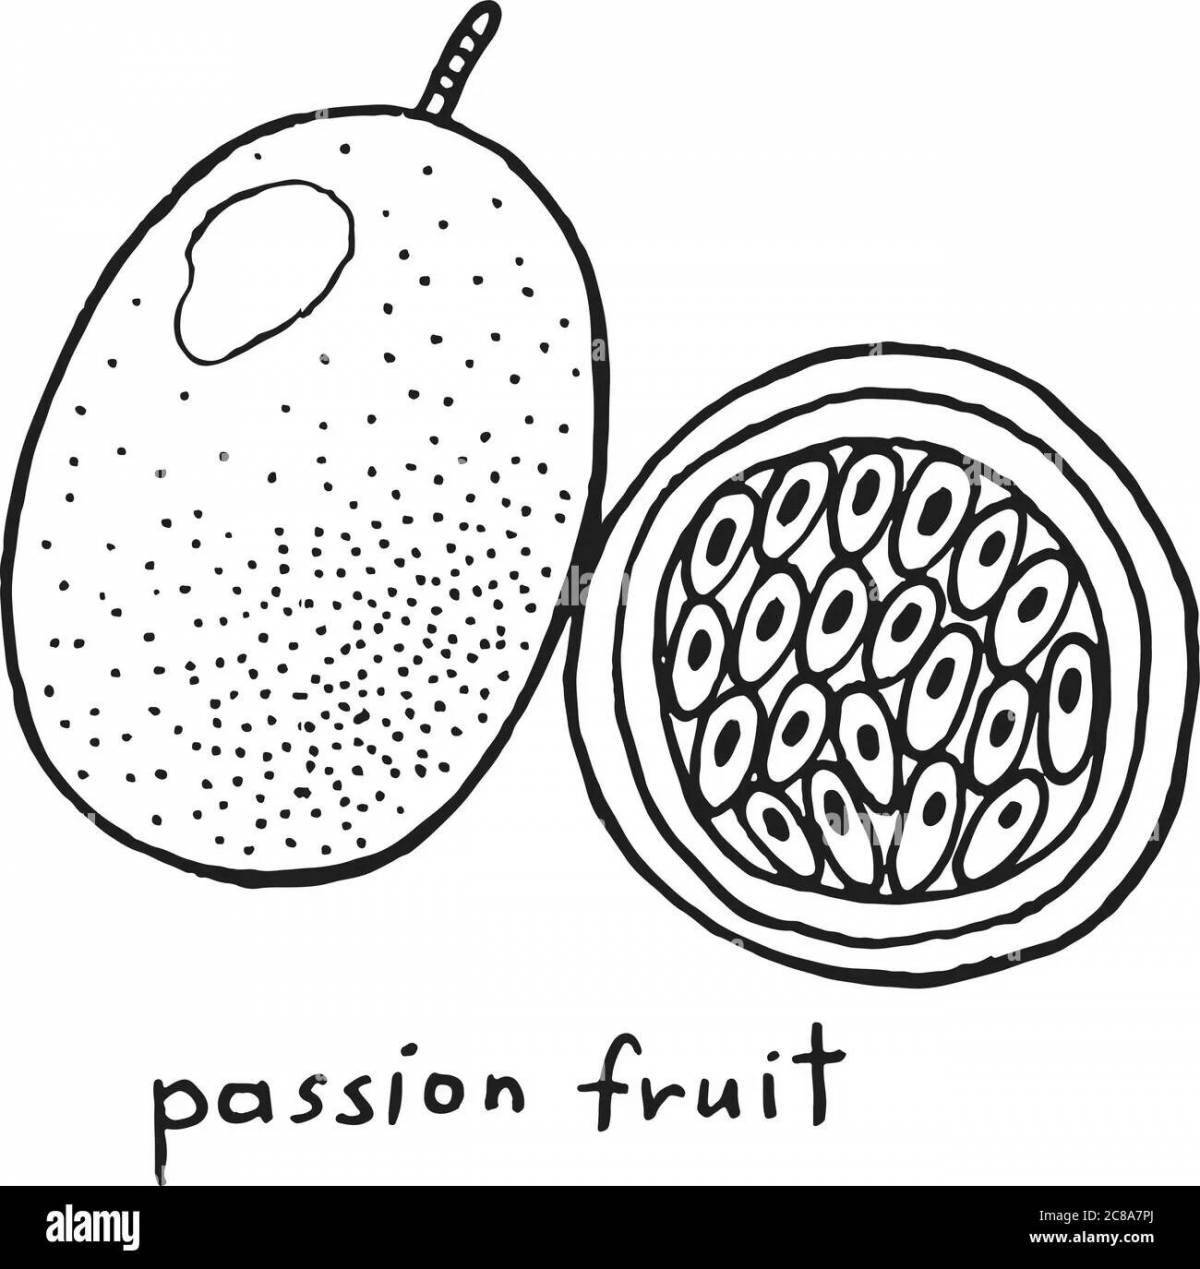 Sparkly passion fruit coloring page